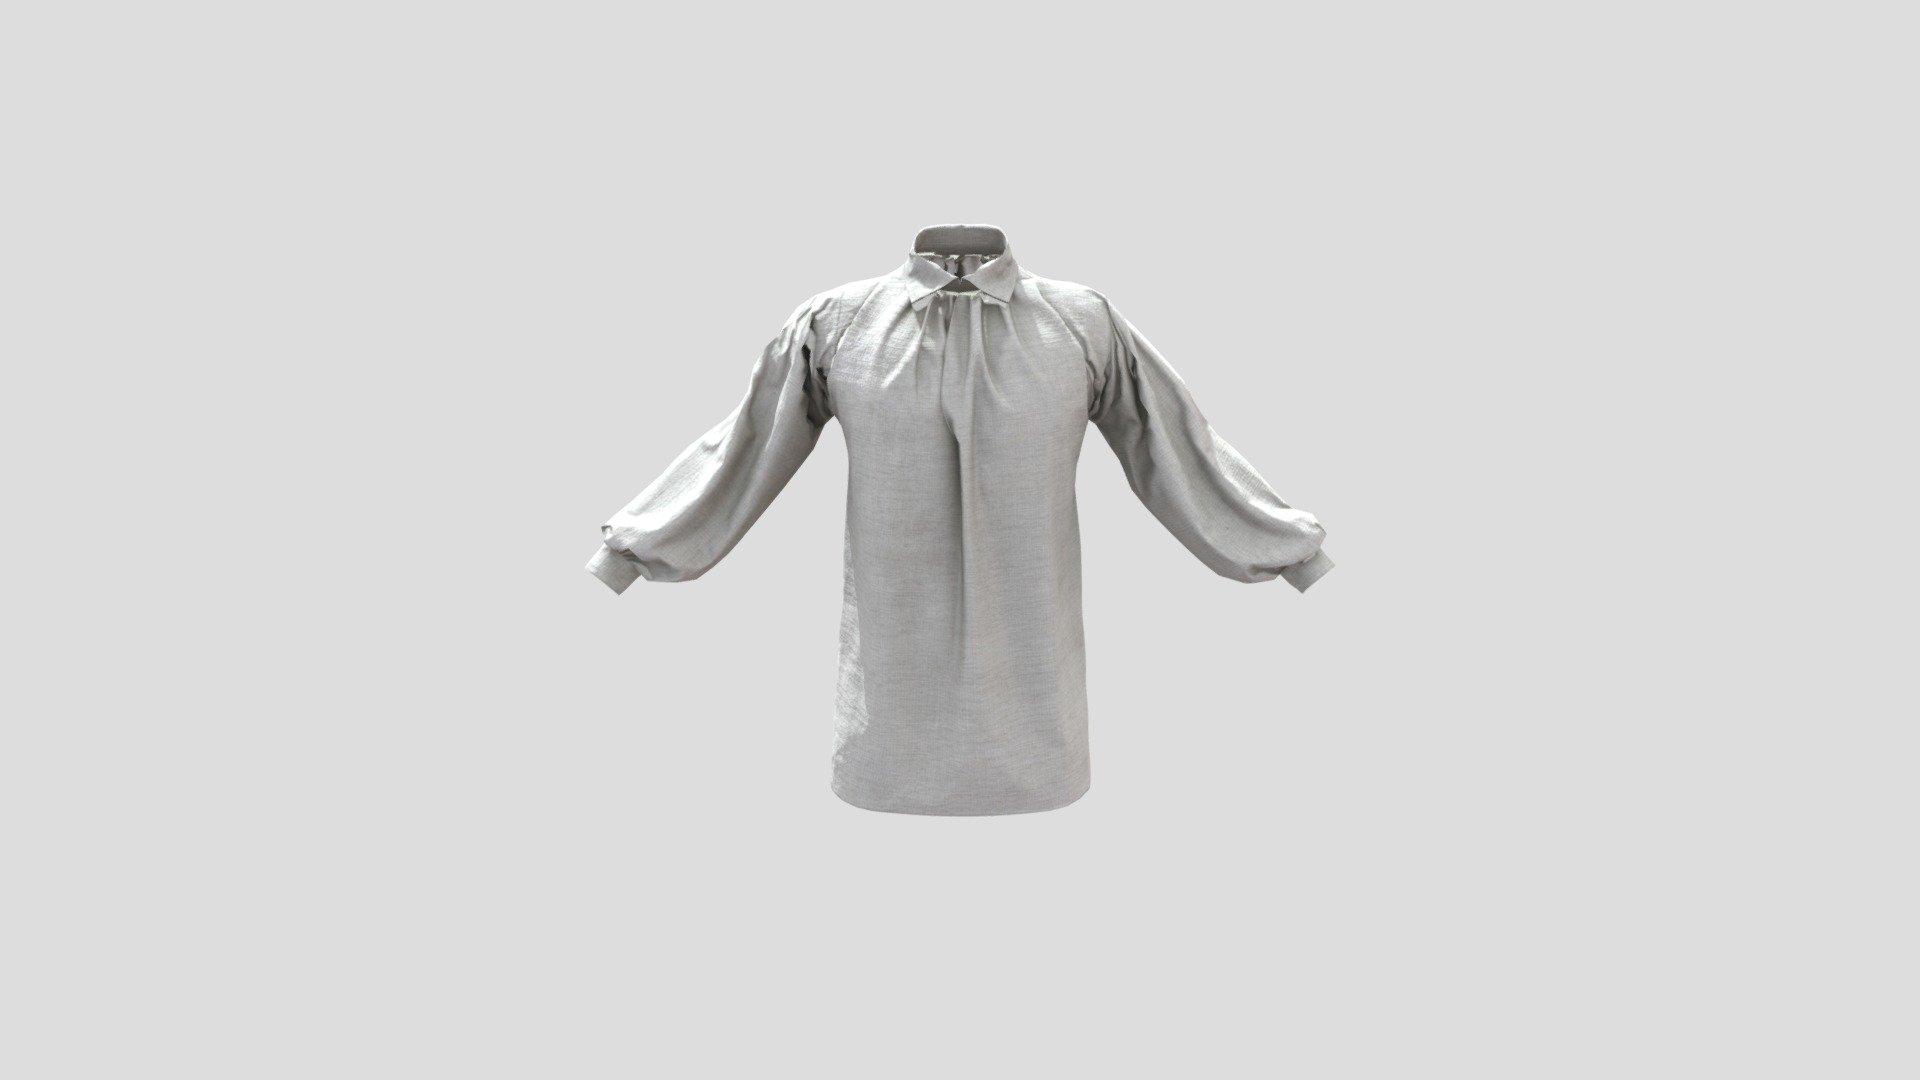 An early 19th Century Men's Shirt, this time with a turned collar. The collars in this period are typically worn straight up and down with a cravat wrapped several times around the neck to hold it in place, but this shirt has a folded collar as a character choice. Someone a little less interested in the fashionable style of the time might wear their collar like this 3d model